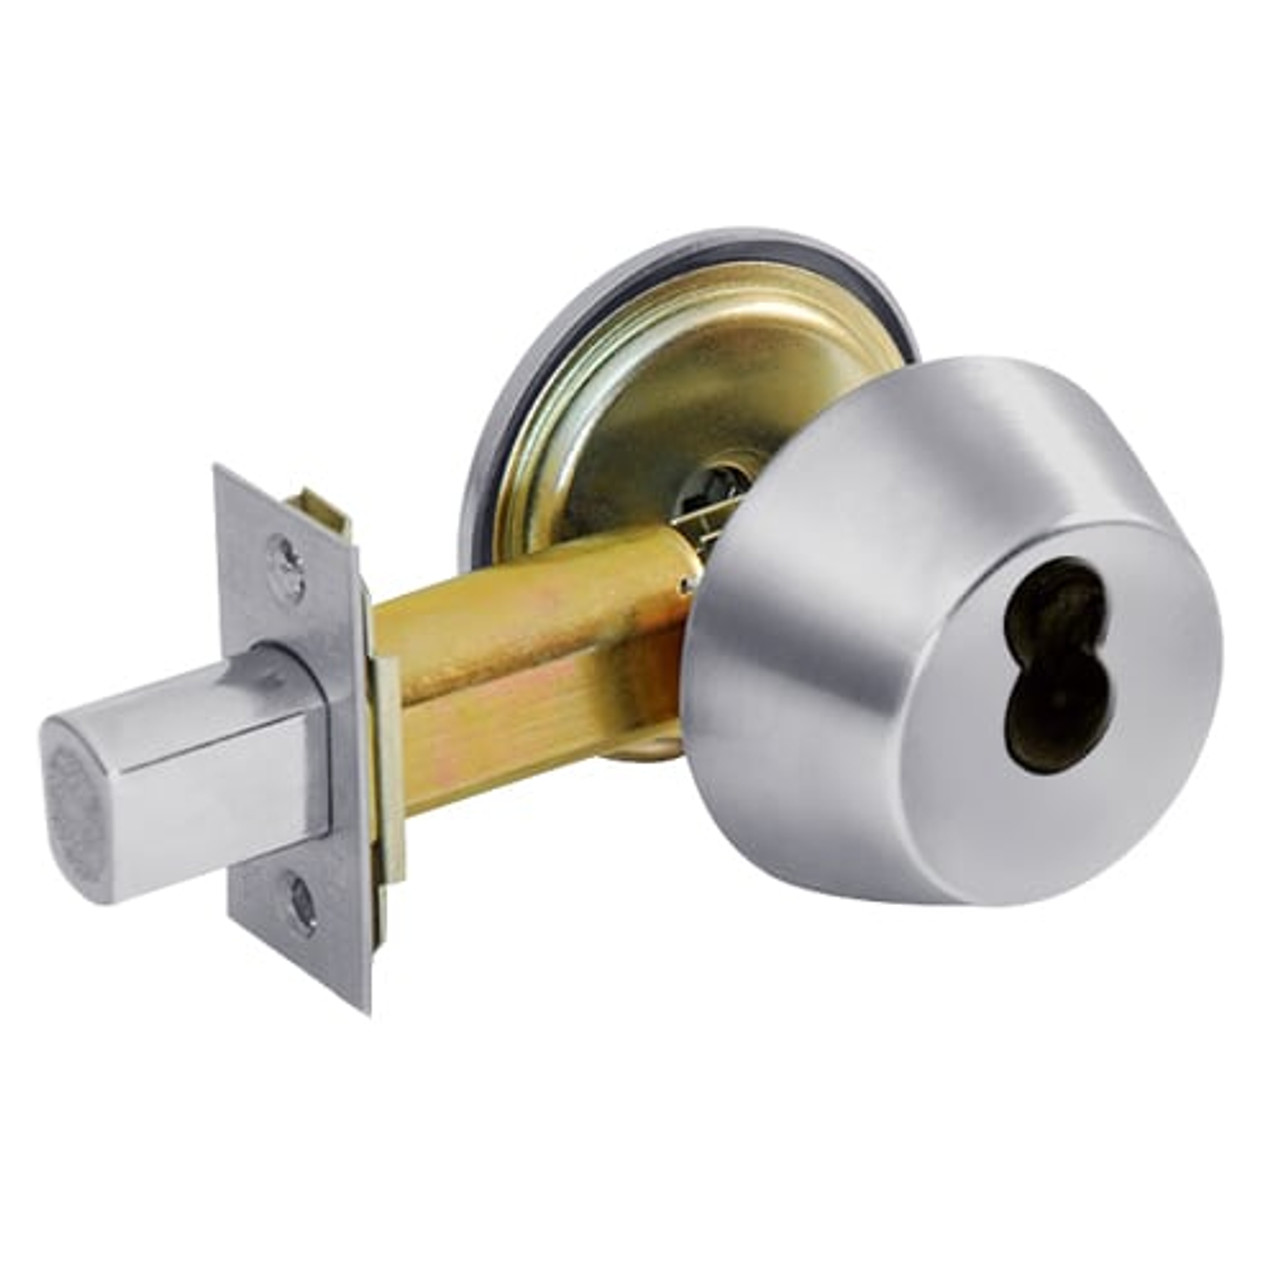 DL3212-626-CL7 Corbin DL3200 Series IC 7-Pin Less Core Cylindrical Deadlocks with Double Cylinder in Satin Chrome Finish